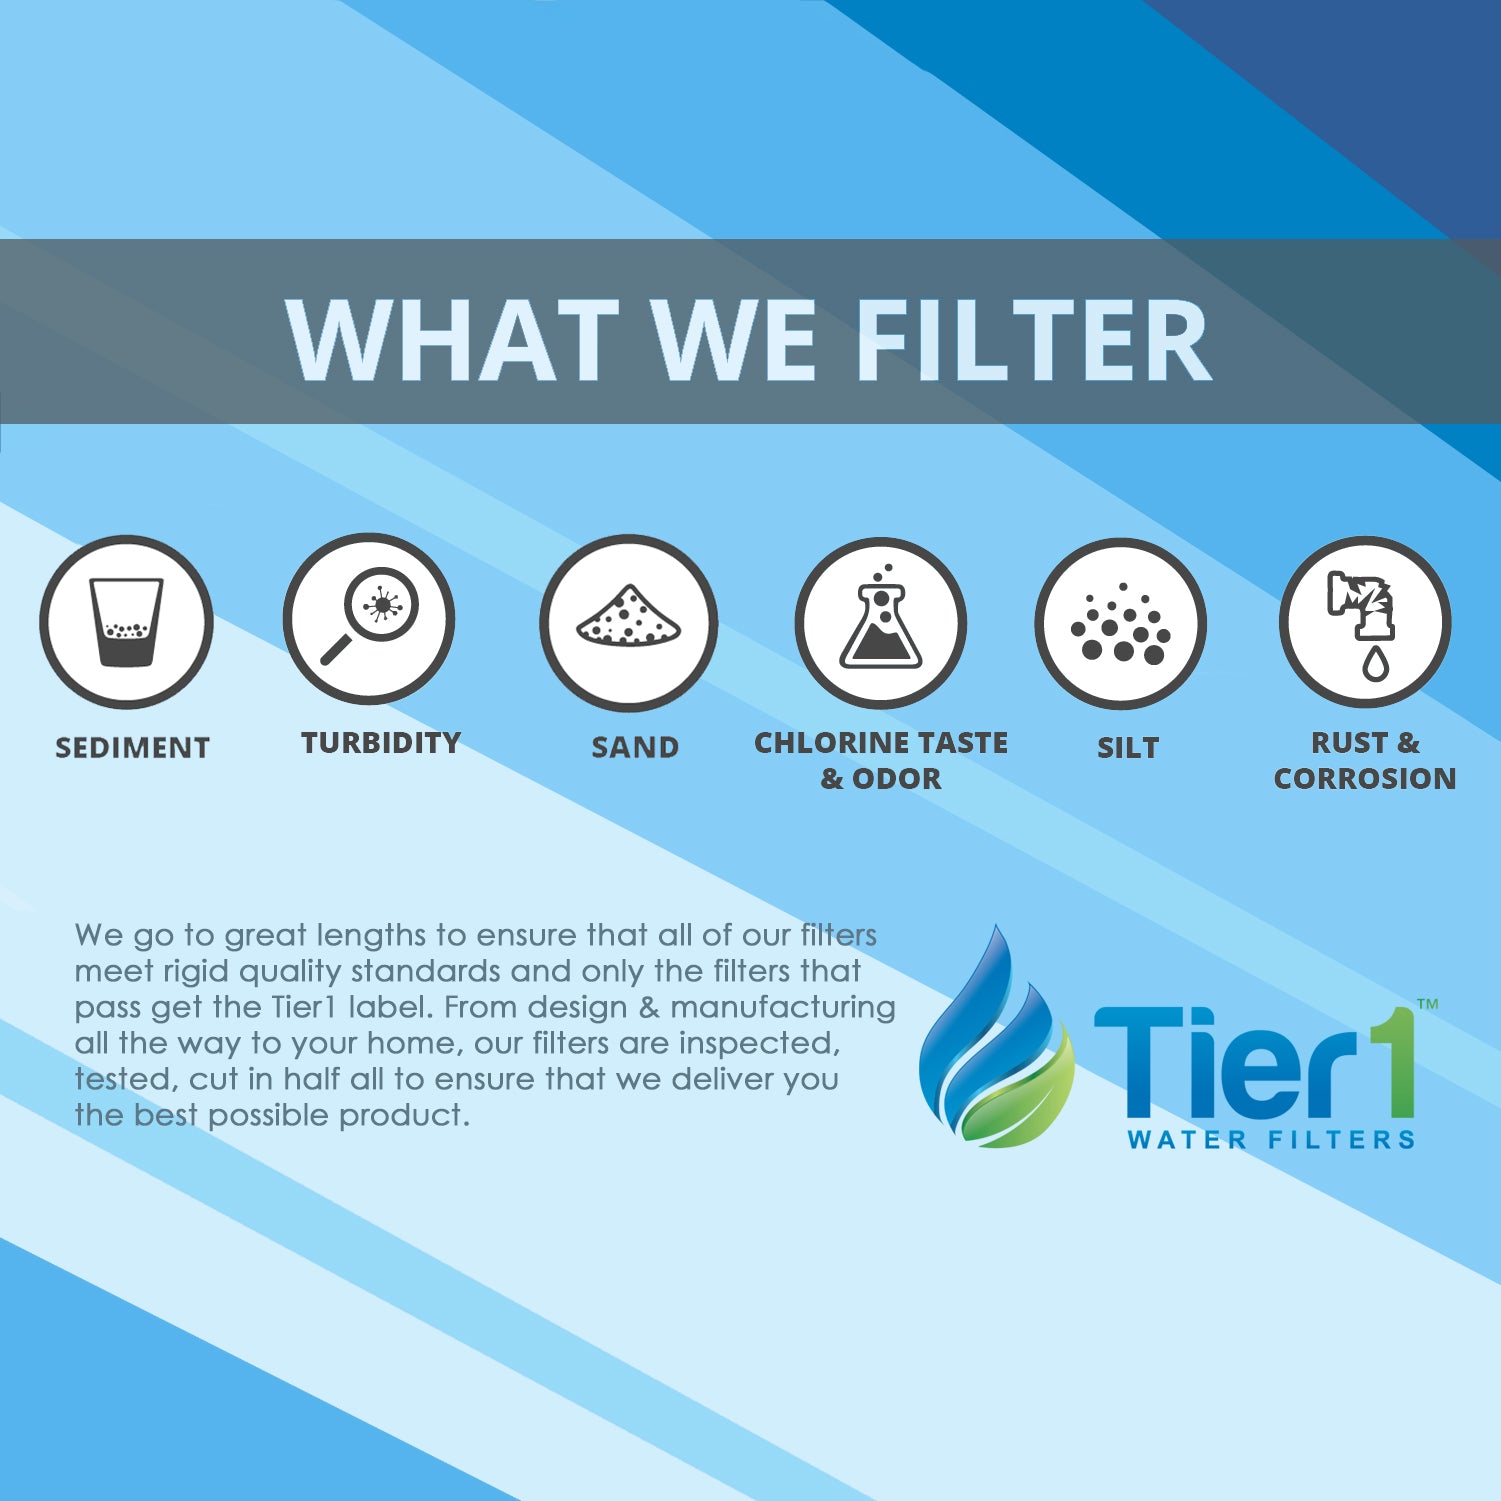 10 x 2.5 Inch 10 Stage Countertop or Undersink Filter Cartridge Replacement by Tier1 (What We Filter)